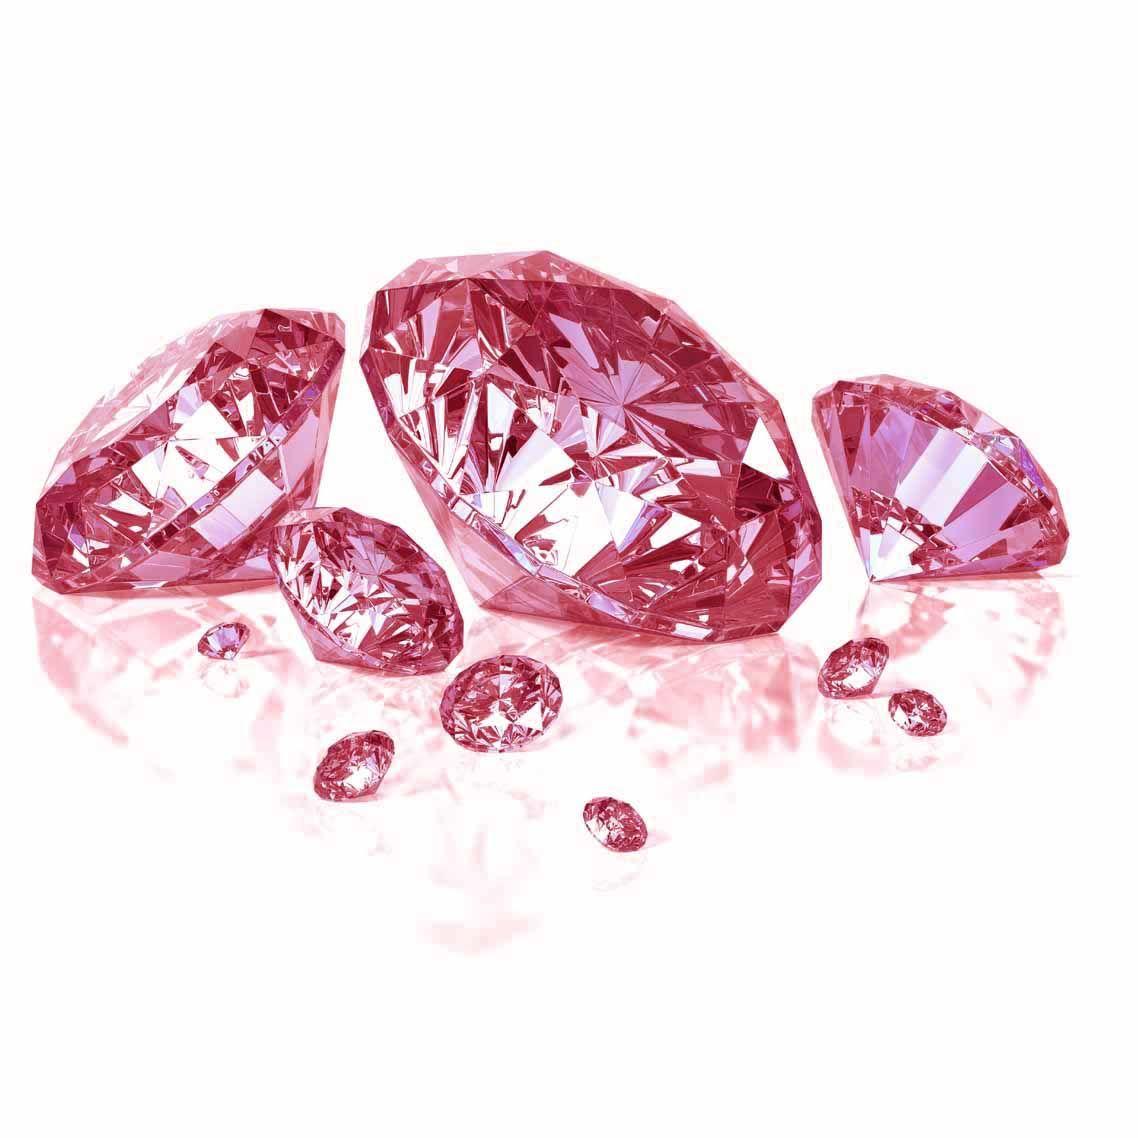 Pink Diamonds Logo - Shout Out To All My Diamonds! Ladies Live Your Worth